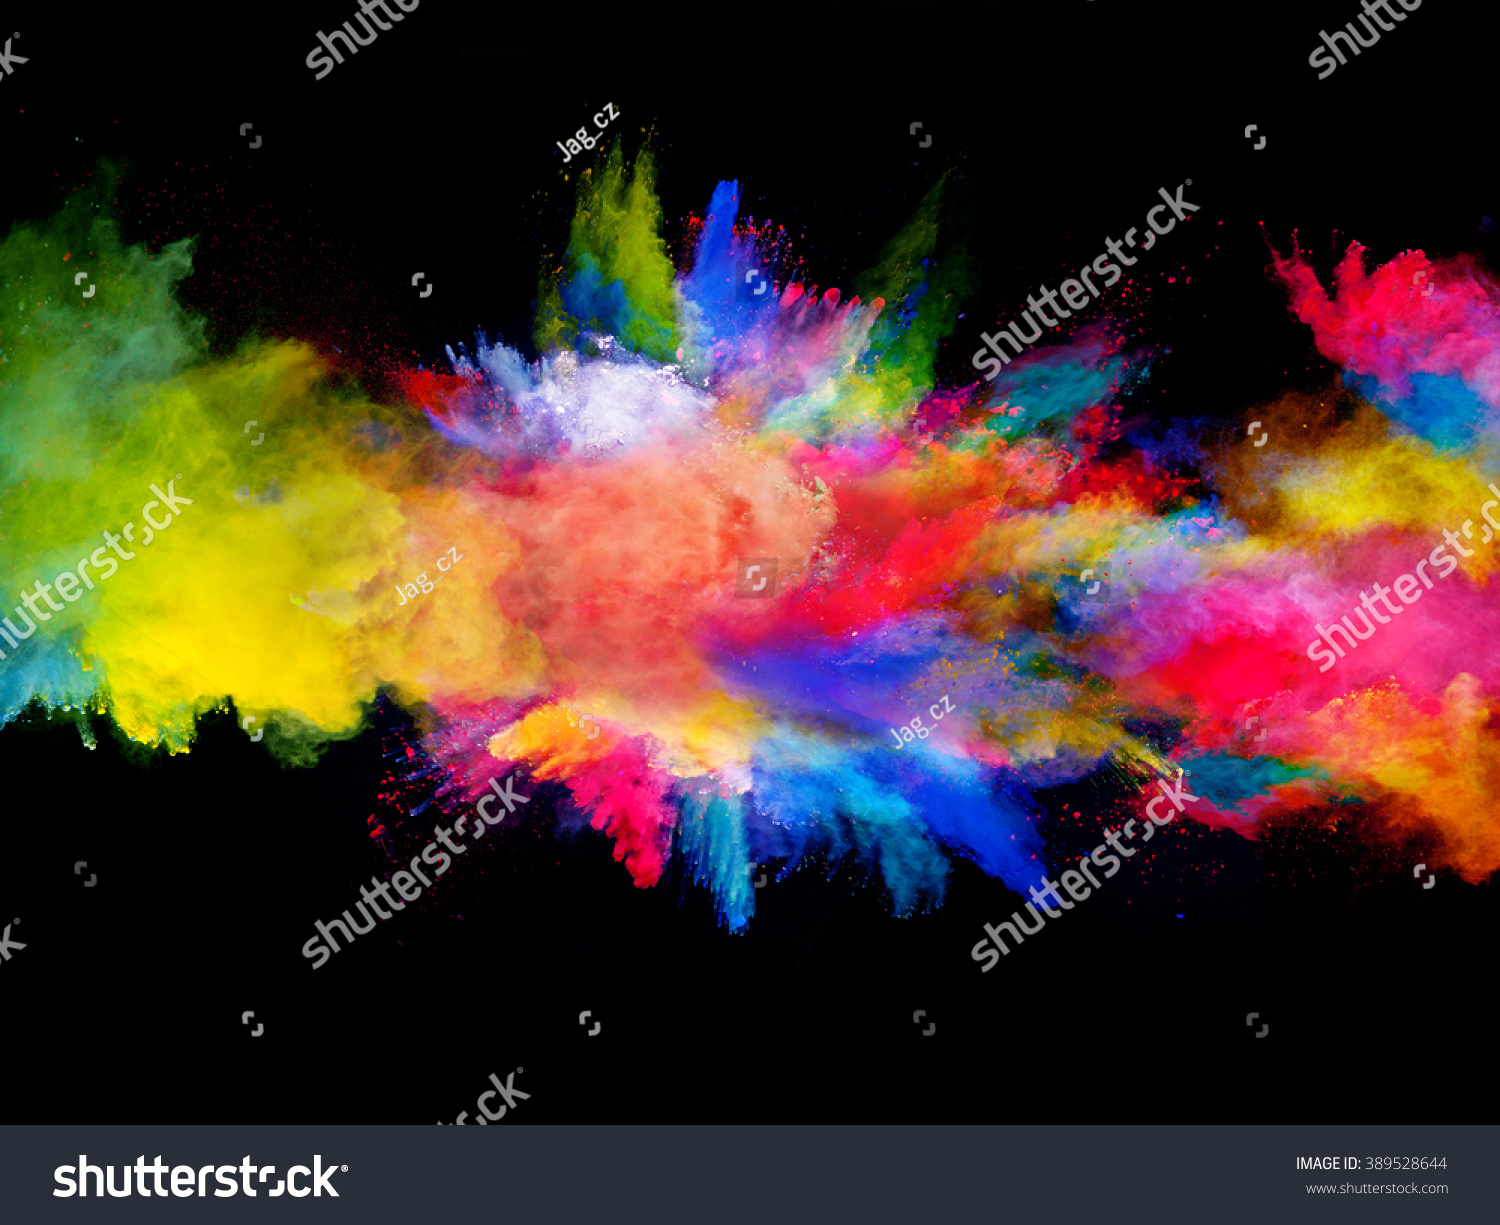 Explosion of colored powder on black background #389528644